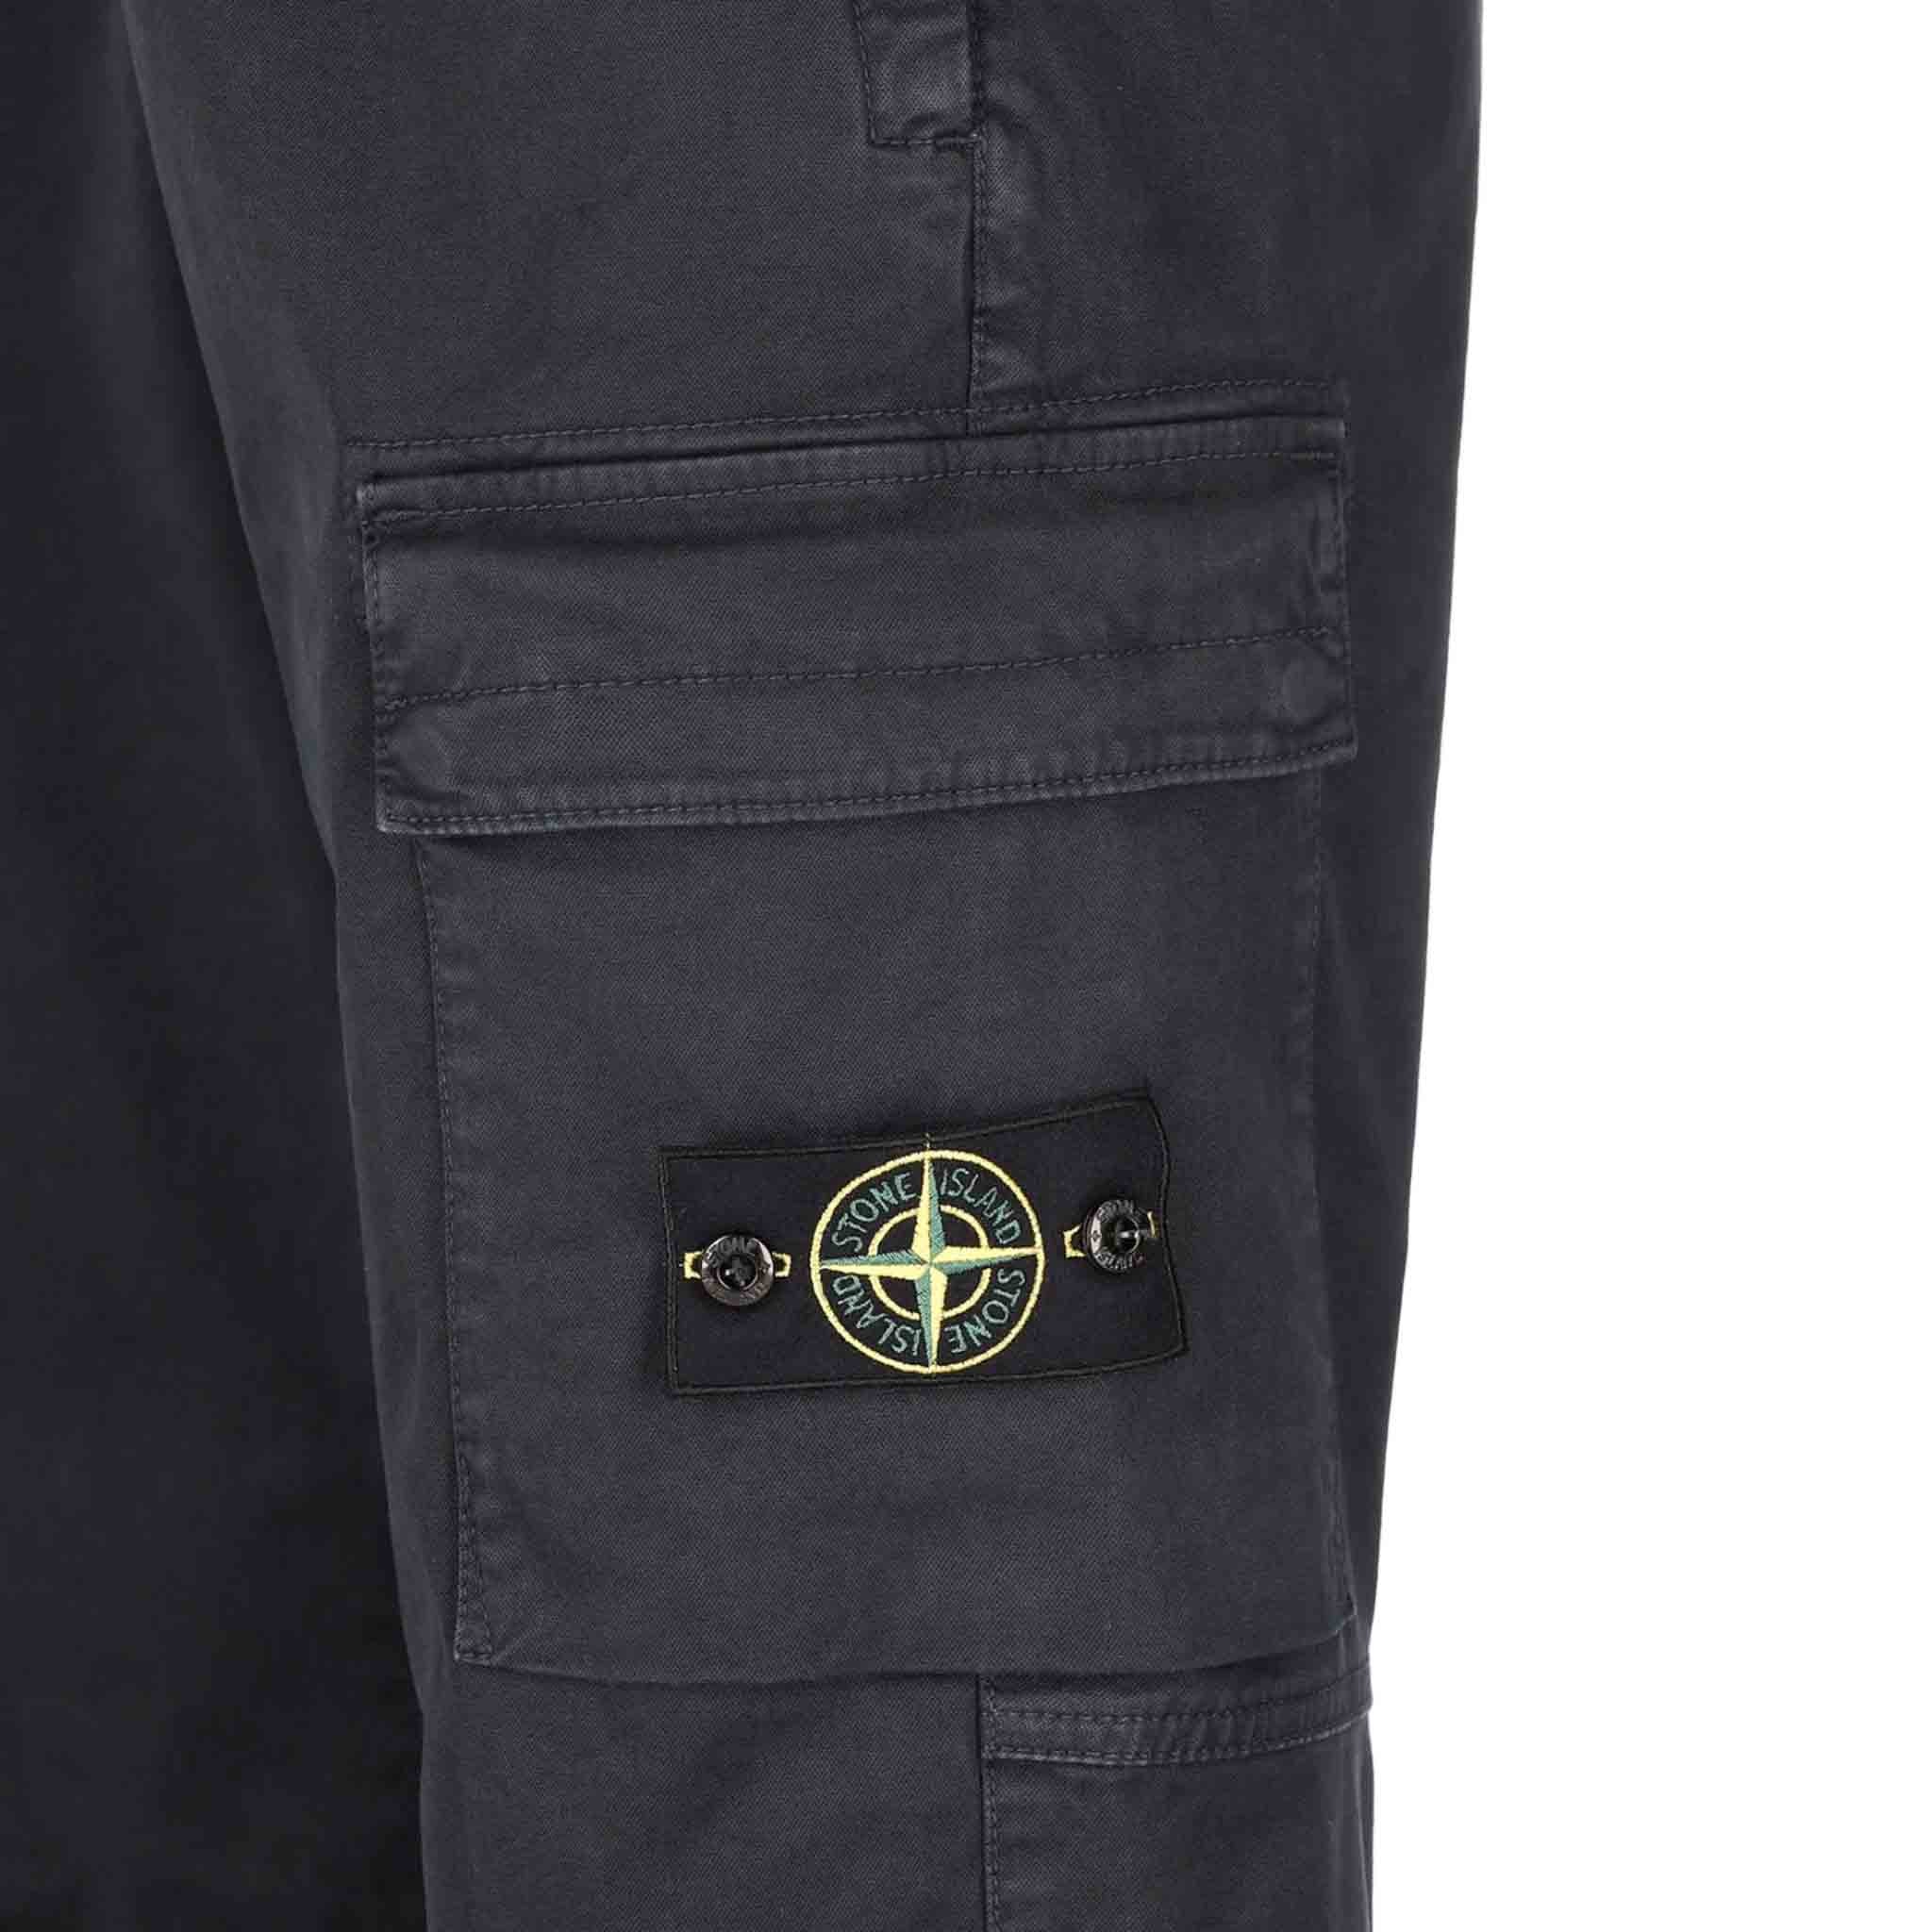 Stone Island Garment Dyed "Old" Treatment Cargo Pants in Lead Grey